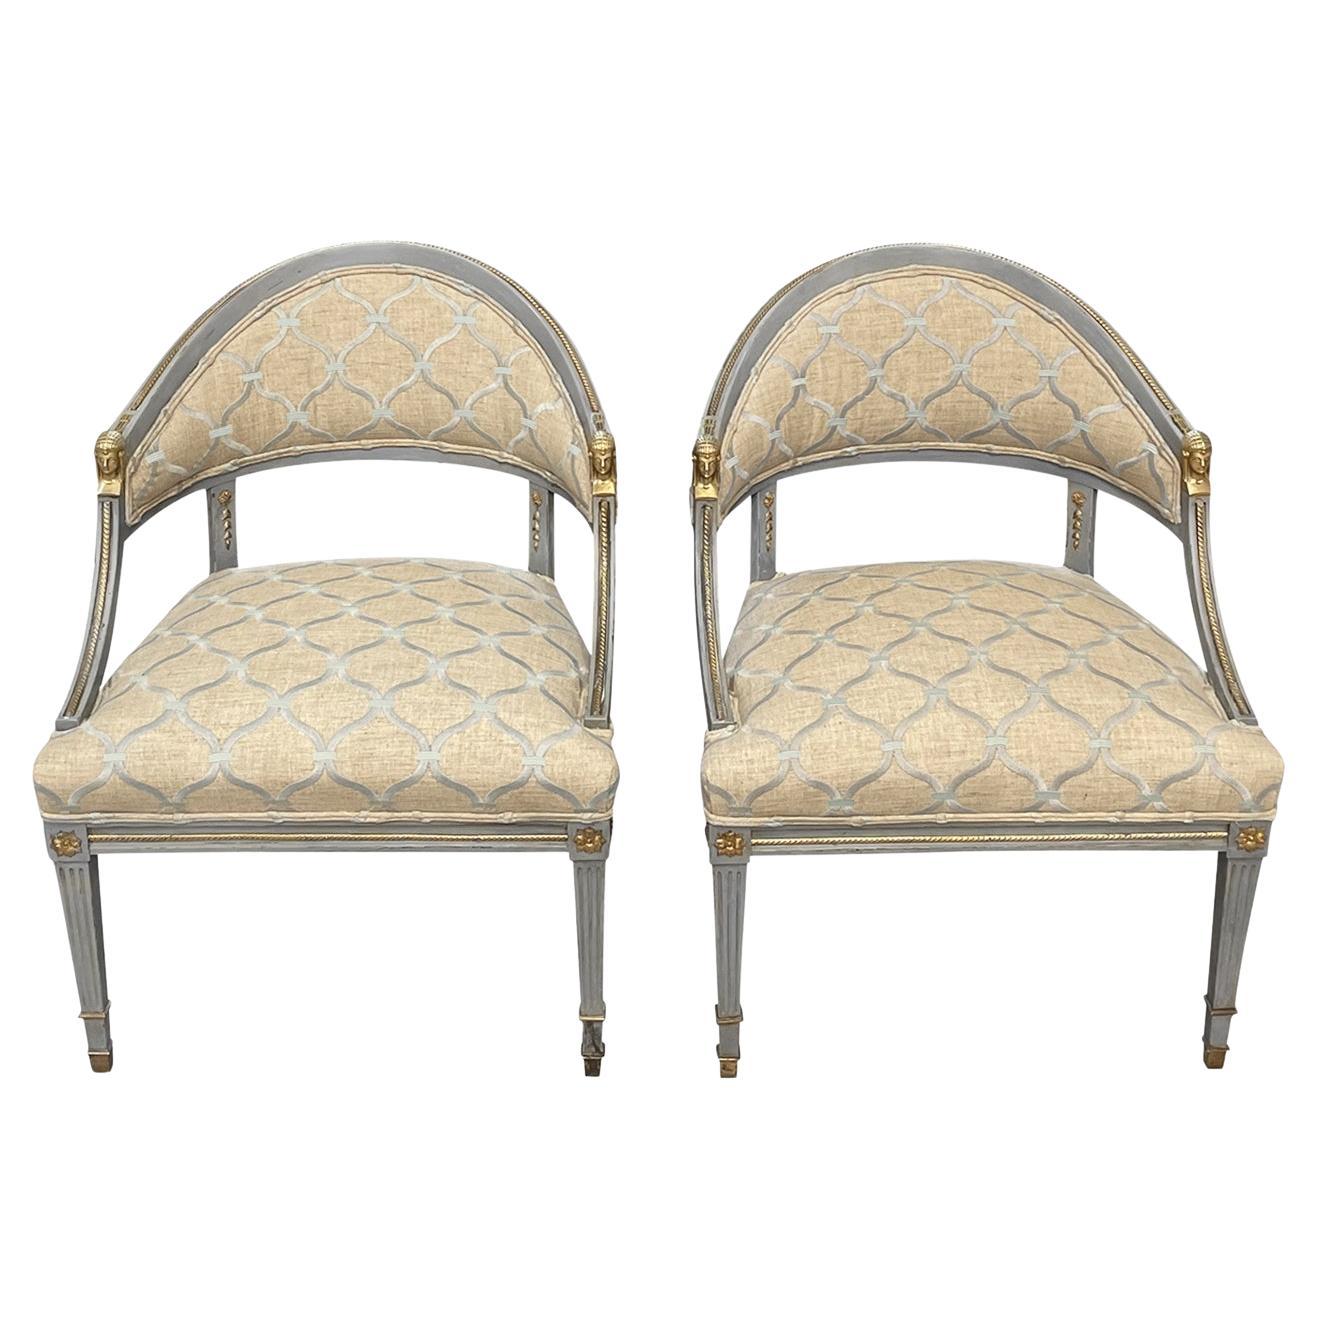 19th Century Pair of Swedish Gustavian Birch Chairs Attributed to Ephraim Ståhl For Sale